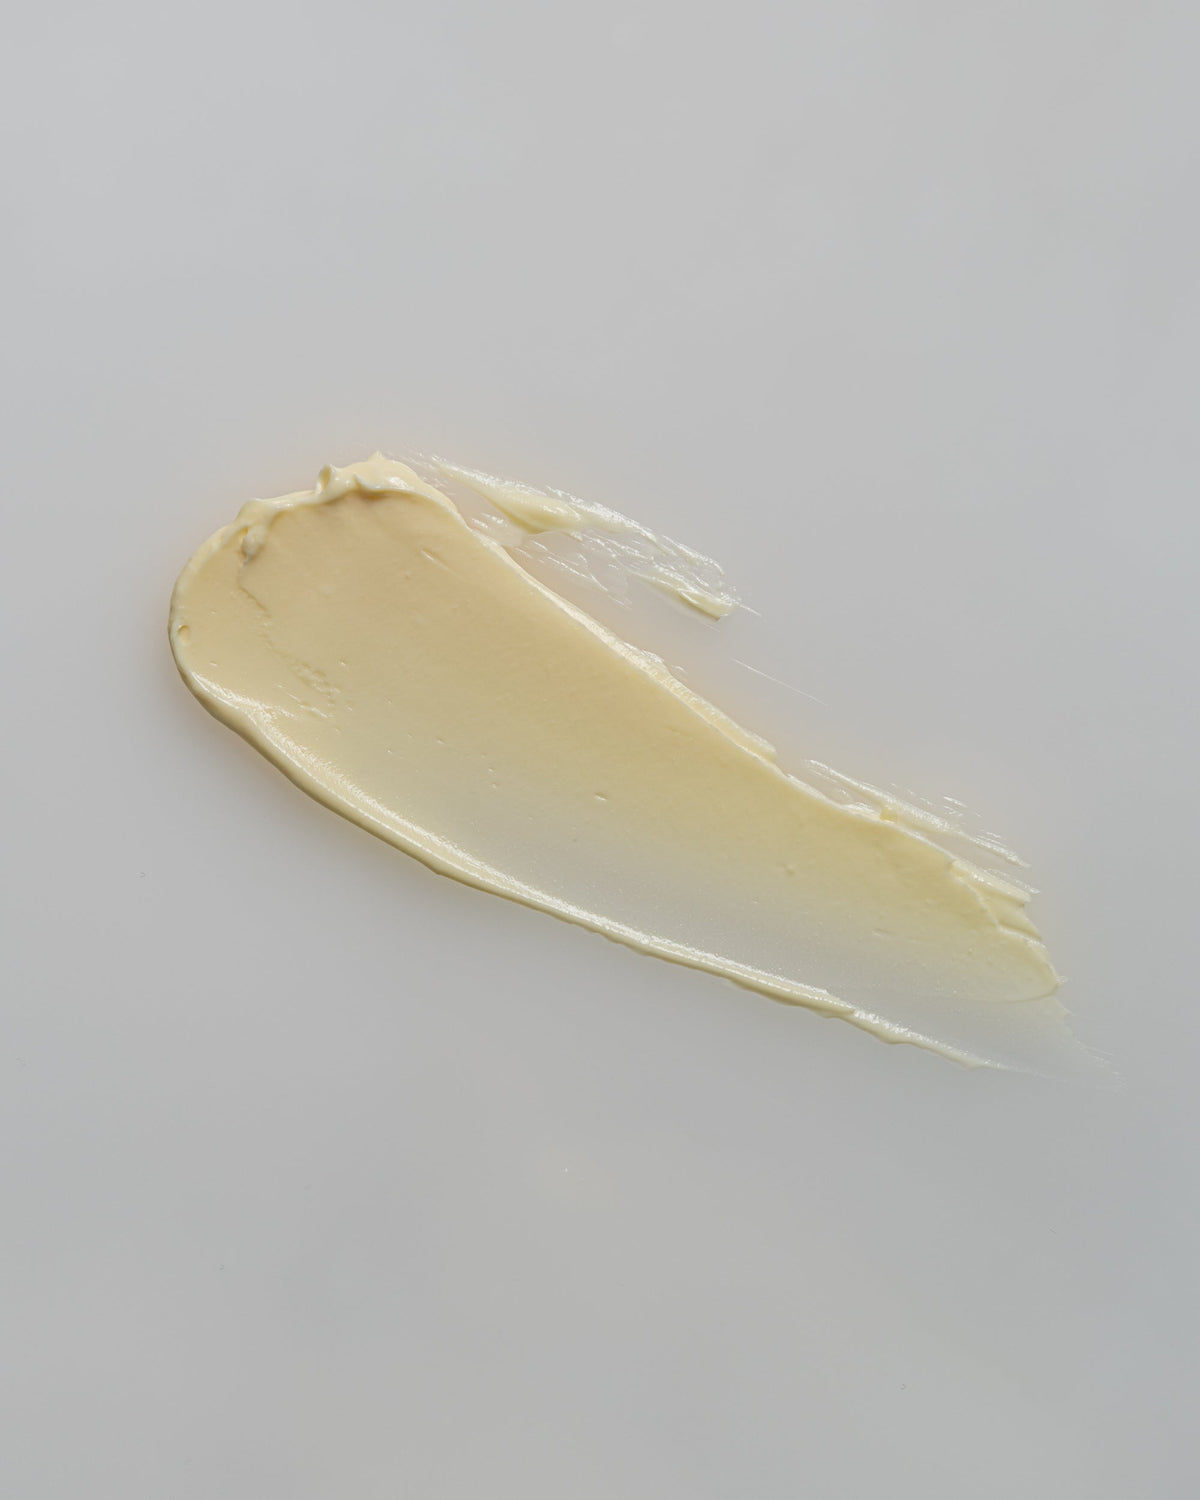 A swipe of creamy, yellow CBD Natural Relief Lotion on a white surface.